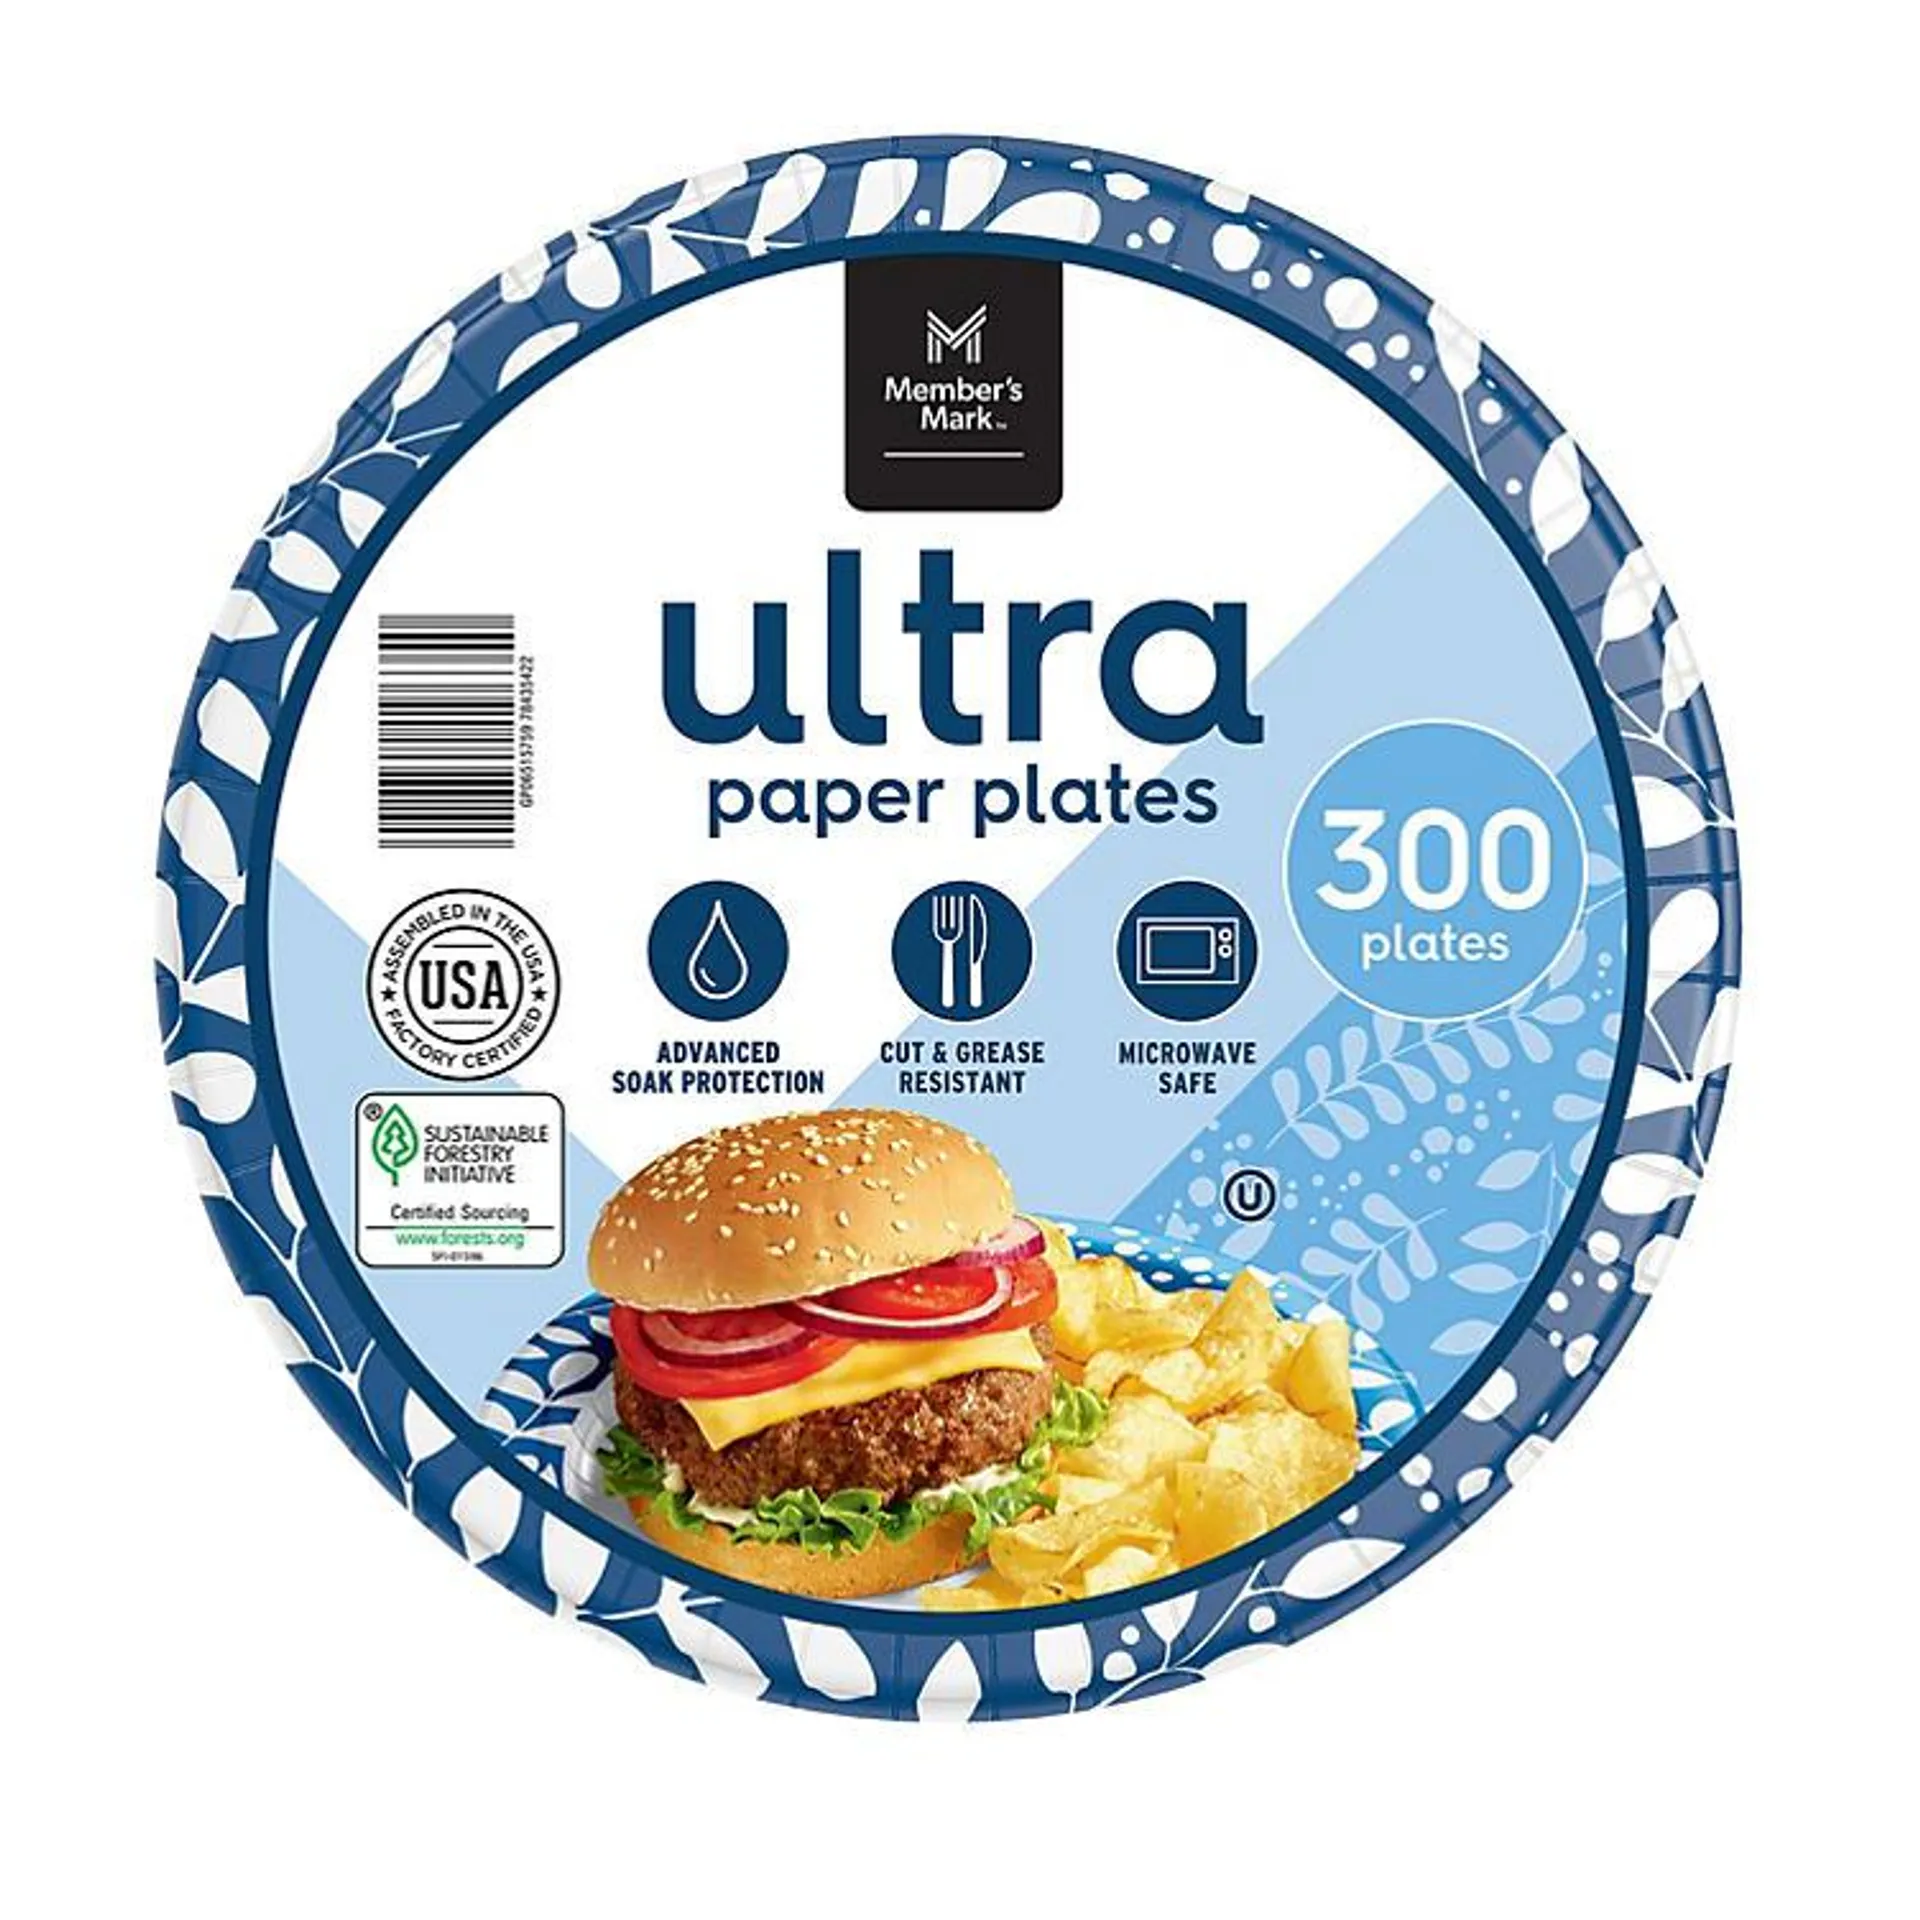 Member's Mark Ultra Lunch Paper Plates (8.5", 300 ct.)